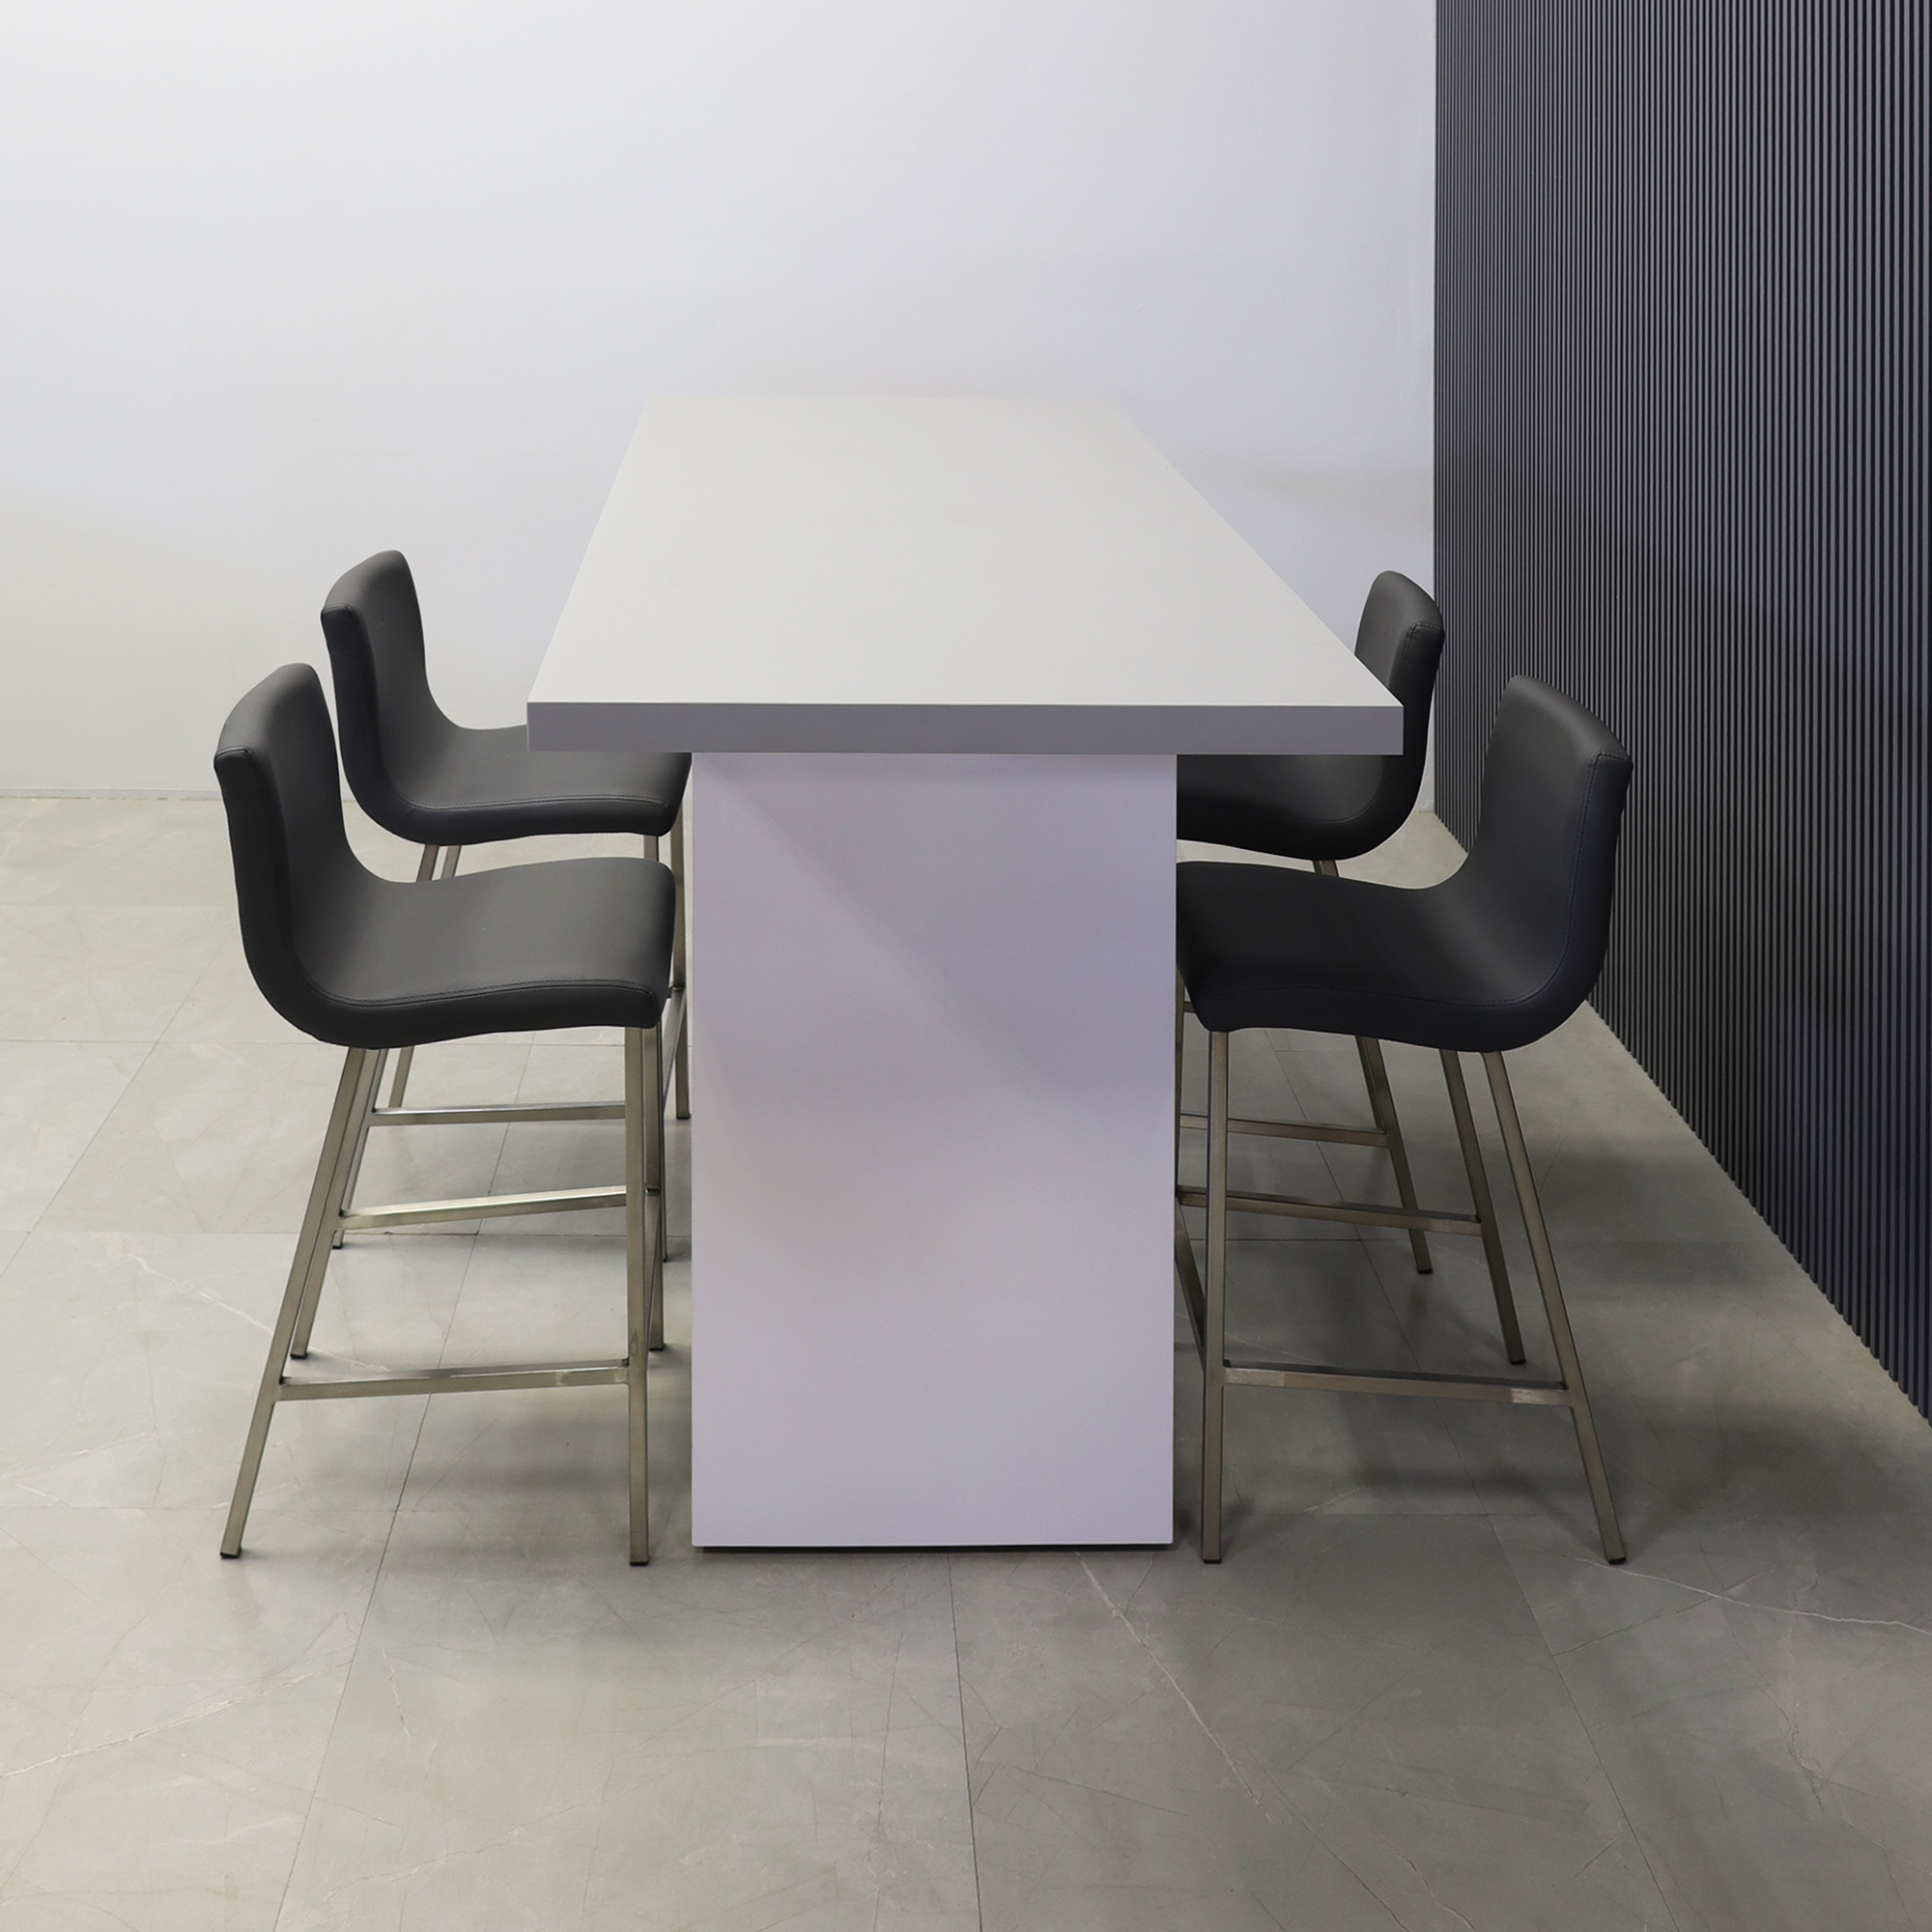 72-inch width x 42-inch height, Windsor Laminate Collaboration Table in fog gray matte laminate top and white gloss laminate base, shown here.